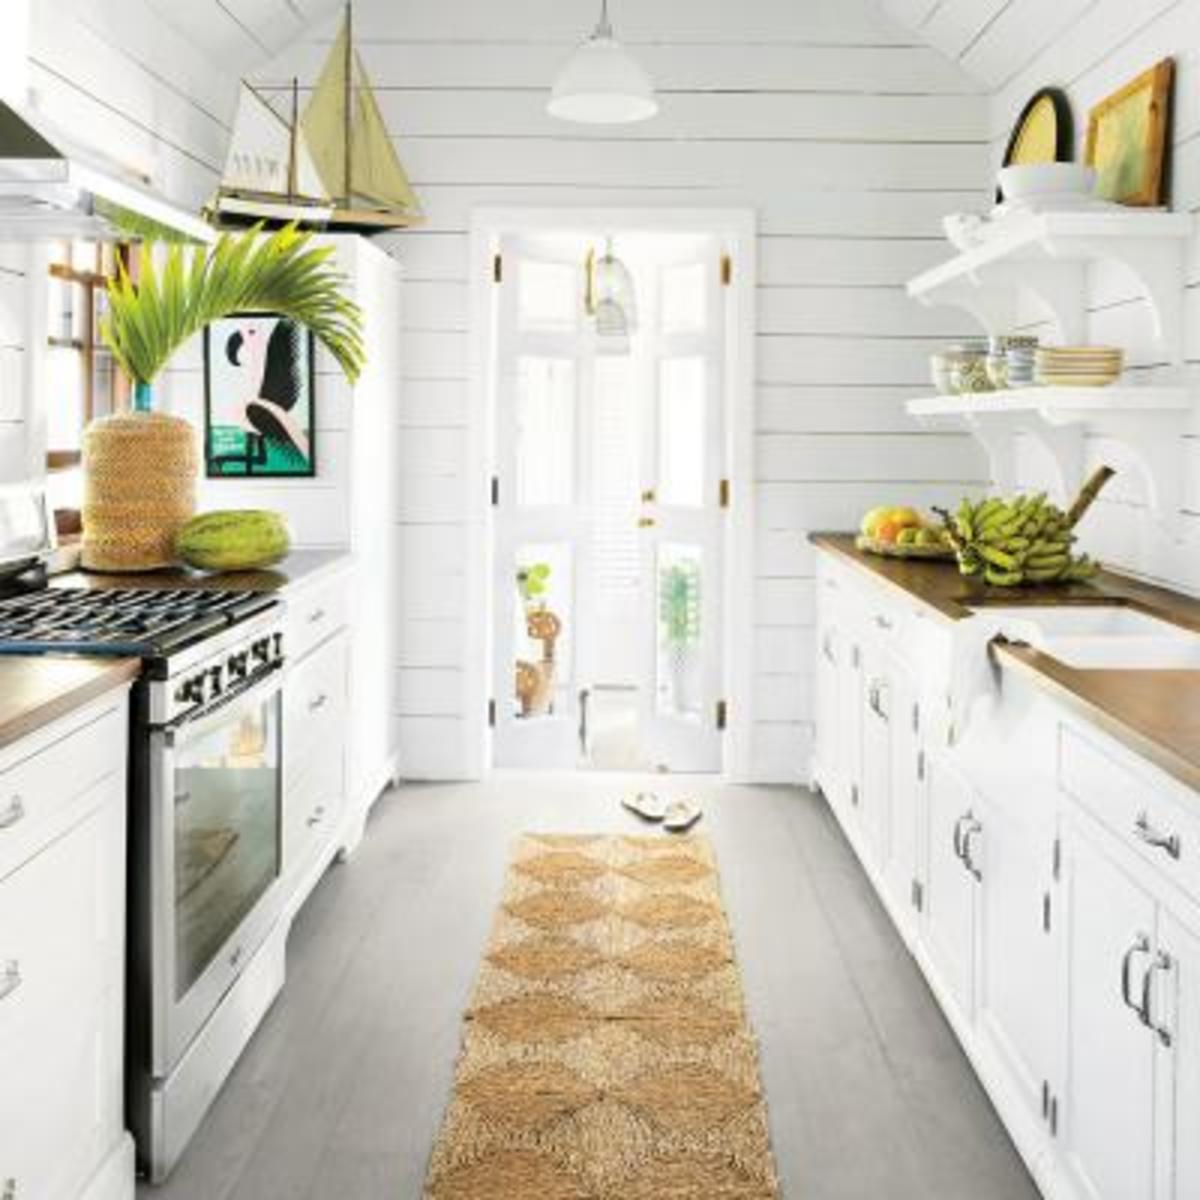 How to Make the Most of a Small Kitchen Simple, Affordable ...